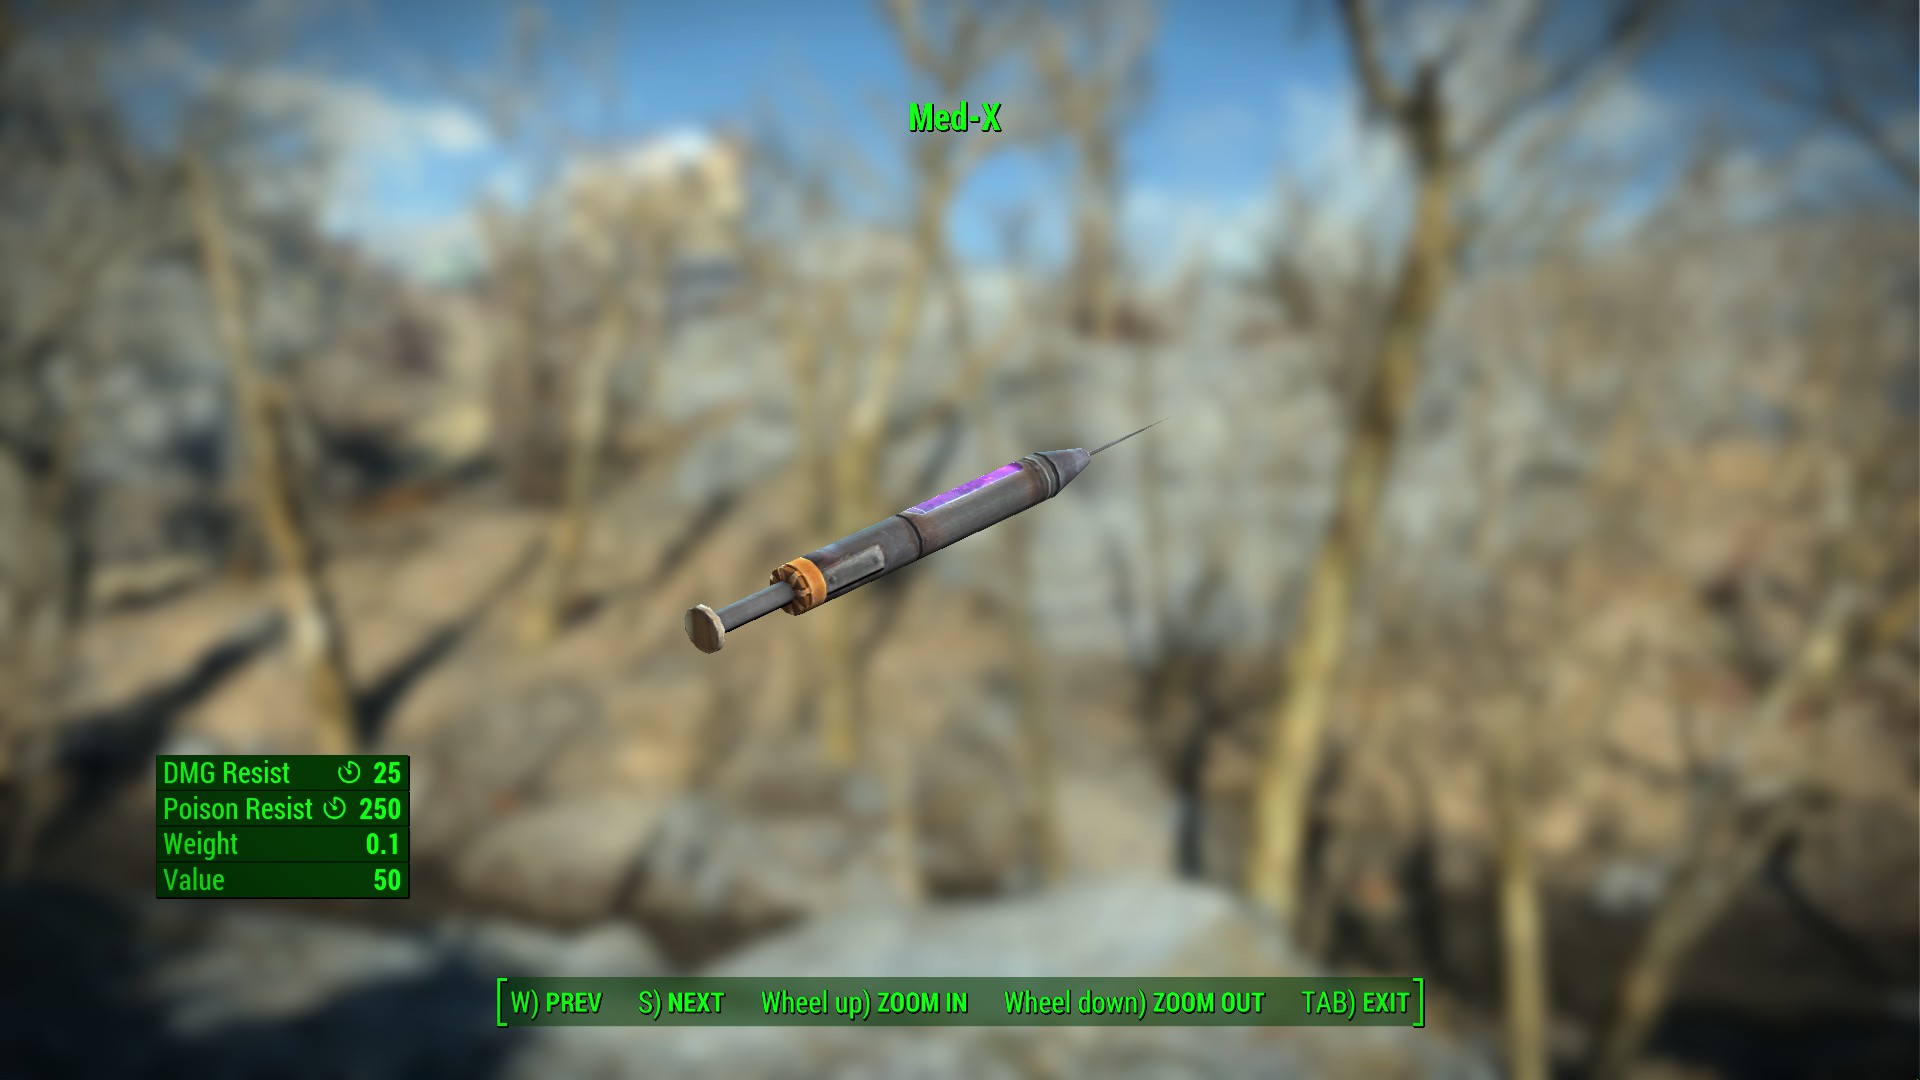 Med-X Chem - Fallout 4